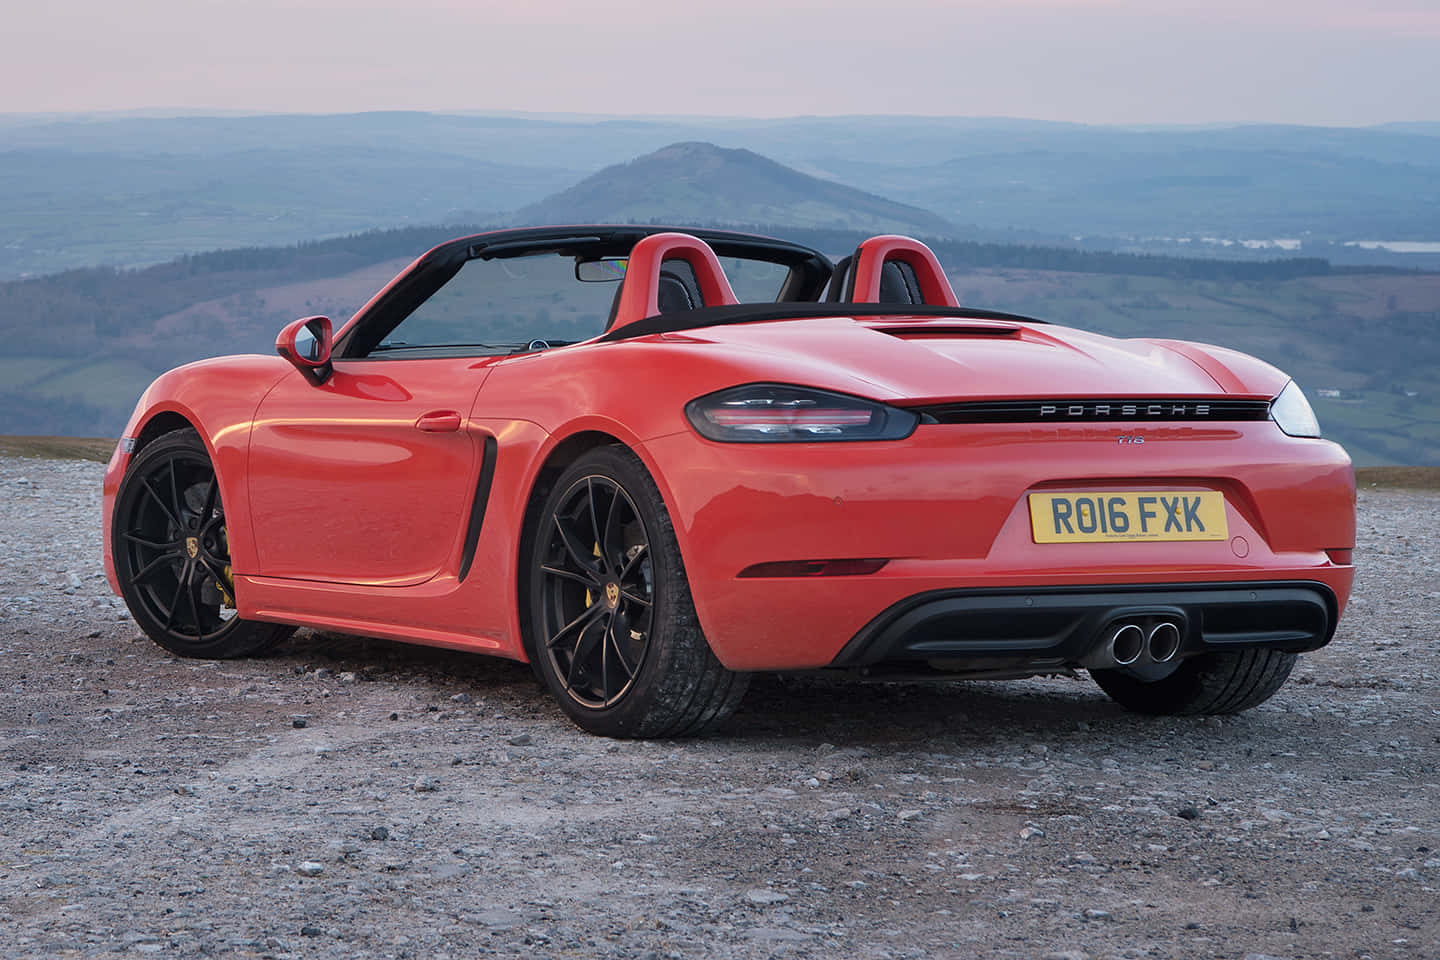 Captivating Porsche Boxster In Its Power And Style Wallpaper